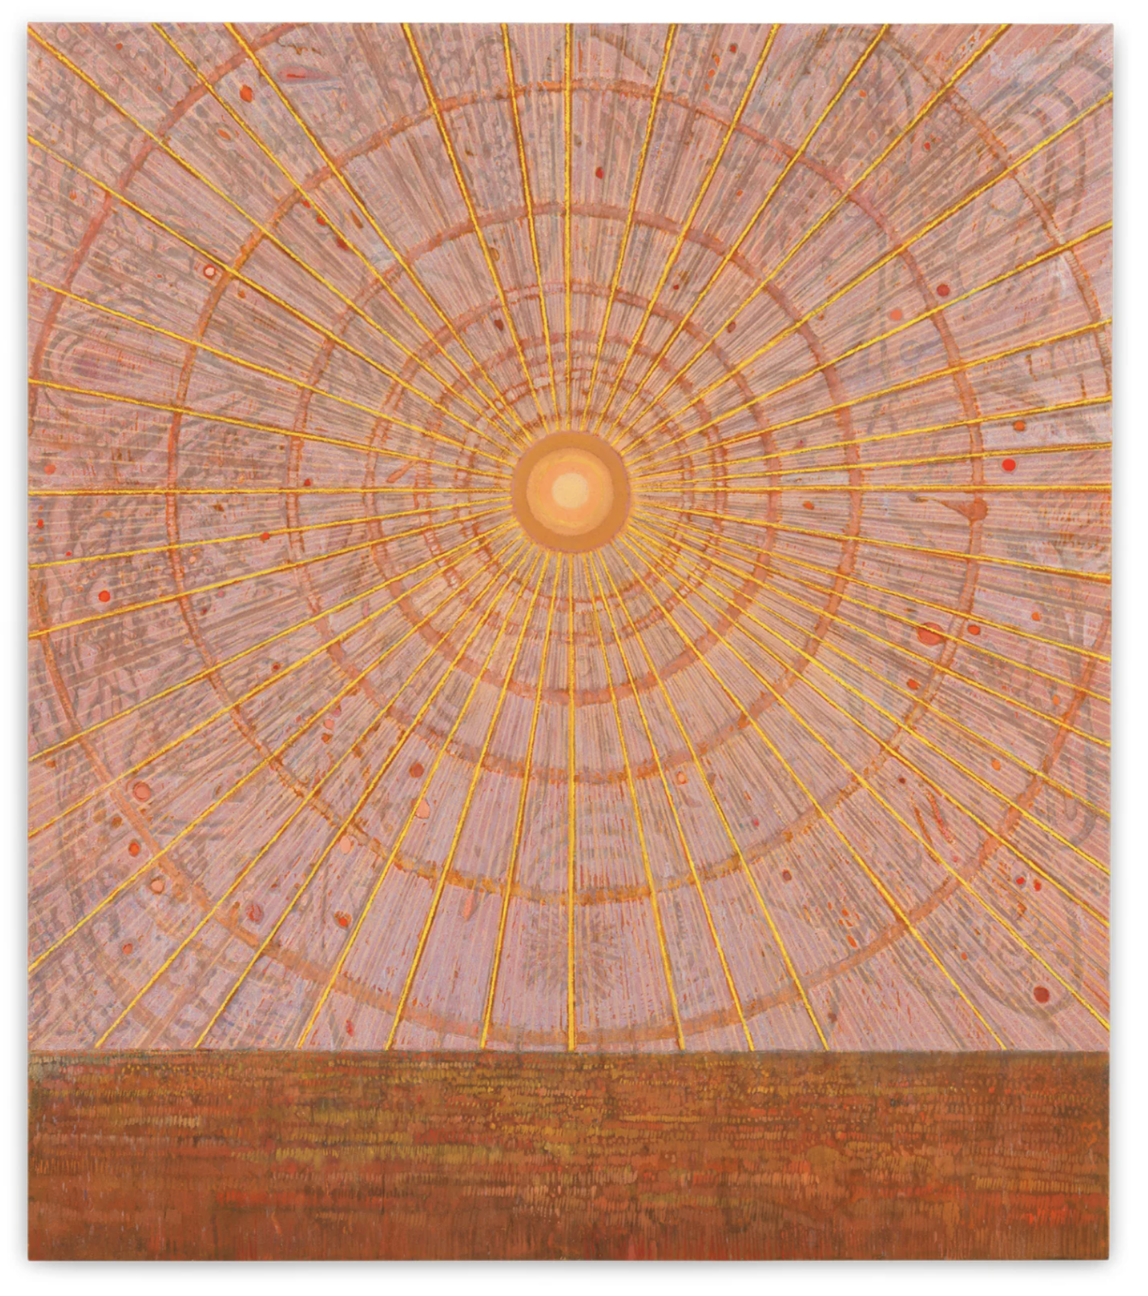    Gash gold-vermillion , 2023    Oil and sand on canvas    244 x 213.4cm (96 x 84in)  